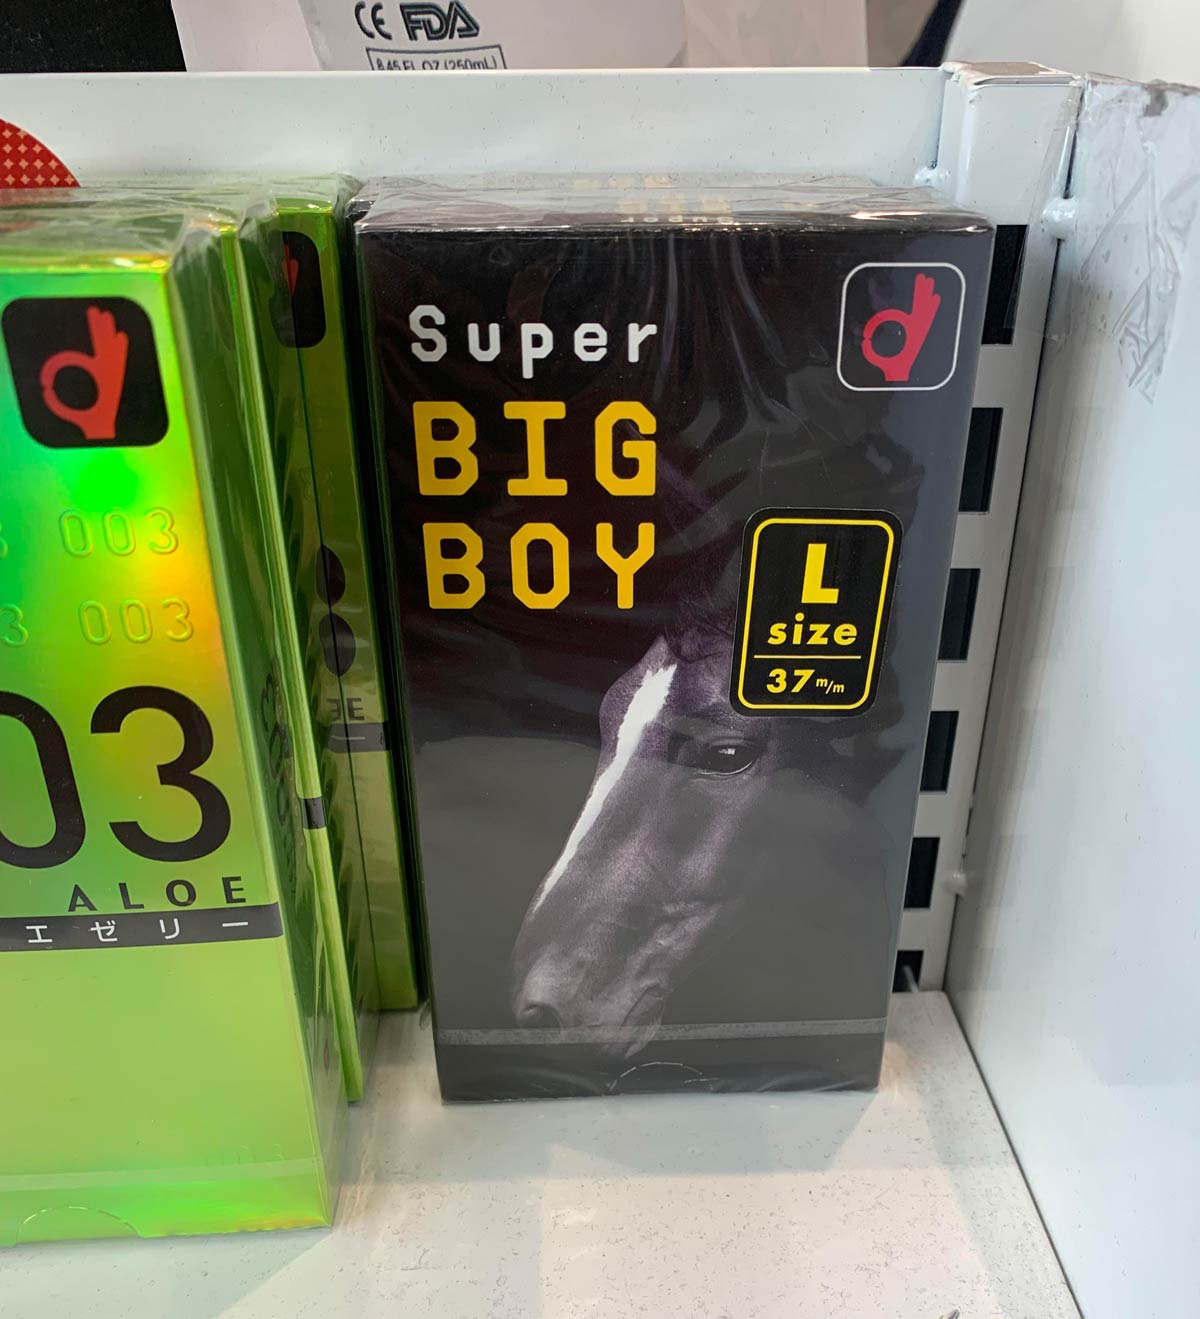 Condoms found at my local Asian convenience store